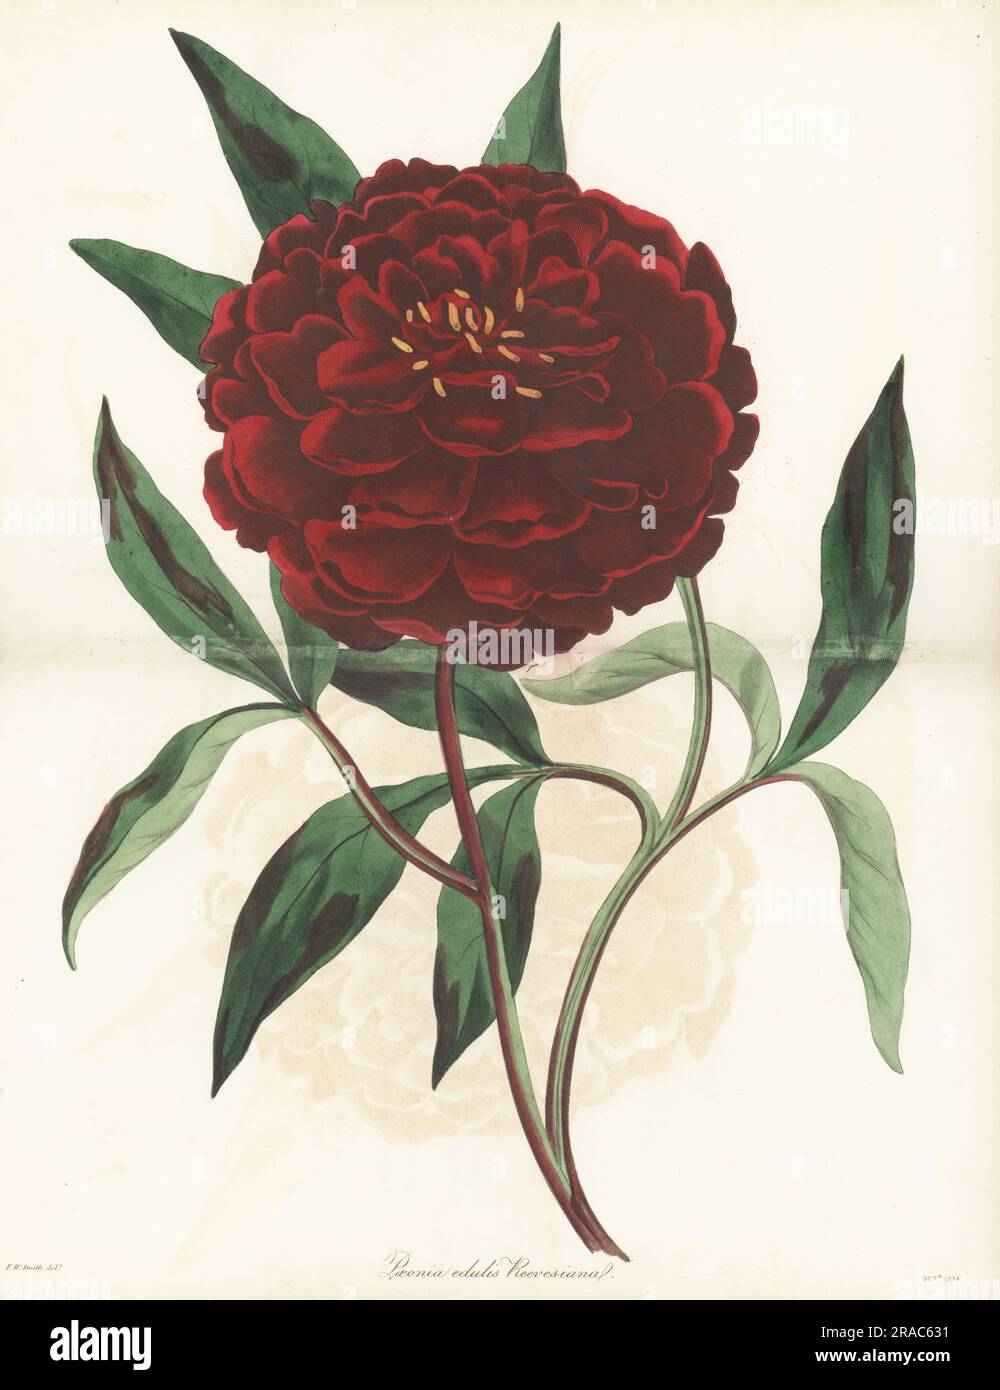 Chinese peony, Paeonia lactiflora. Native of China, introduced by English botanist John Reeves of the East India Company. Mr. Reeve's paeony, Paeonia edulis reevesiana. Handcoloured engraving after a botanical illustration by Frederick William Smith from Joseph Paxton’s Magazine of Botany, and Register of Flowering Plants, Volume 1, Orr and Smith, London, 1834. Stock Photo